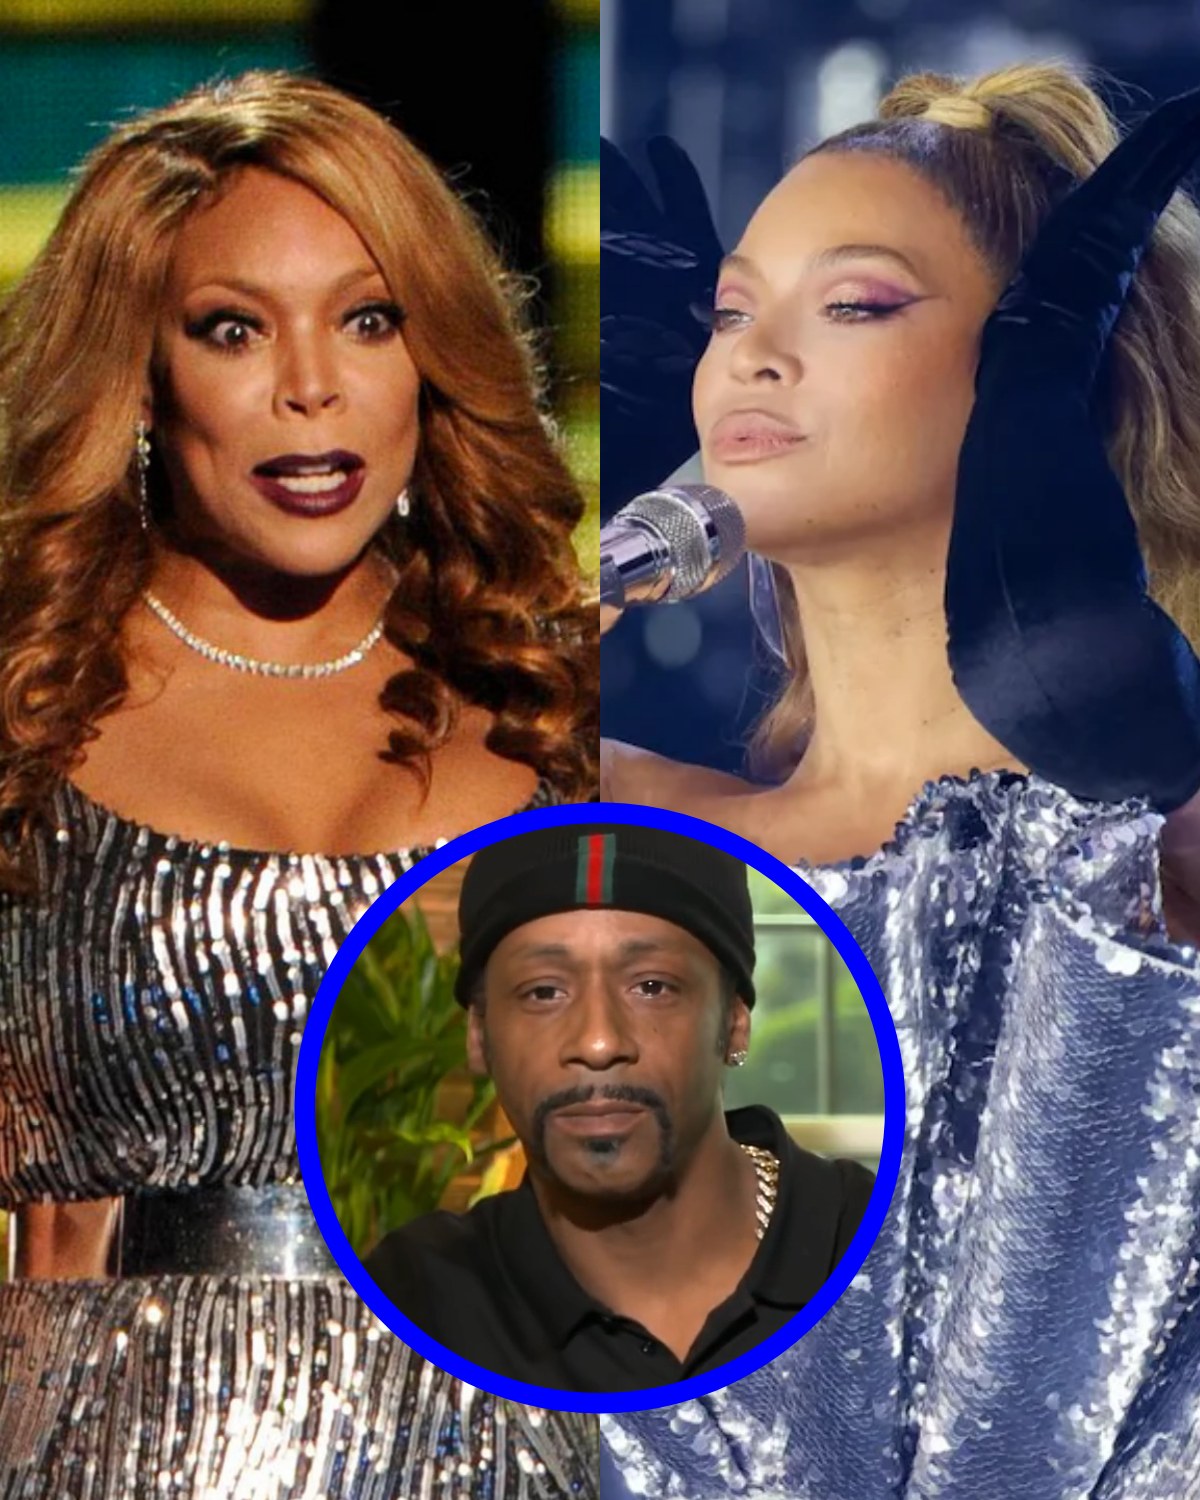 CANCEL BEYONCE & JAY Z, Diddy JAILED: Wendy Williams EXPOSES DARK TRUTH About Beyoncé (Katt Williams Was Right)